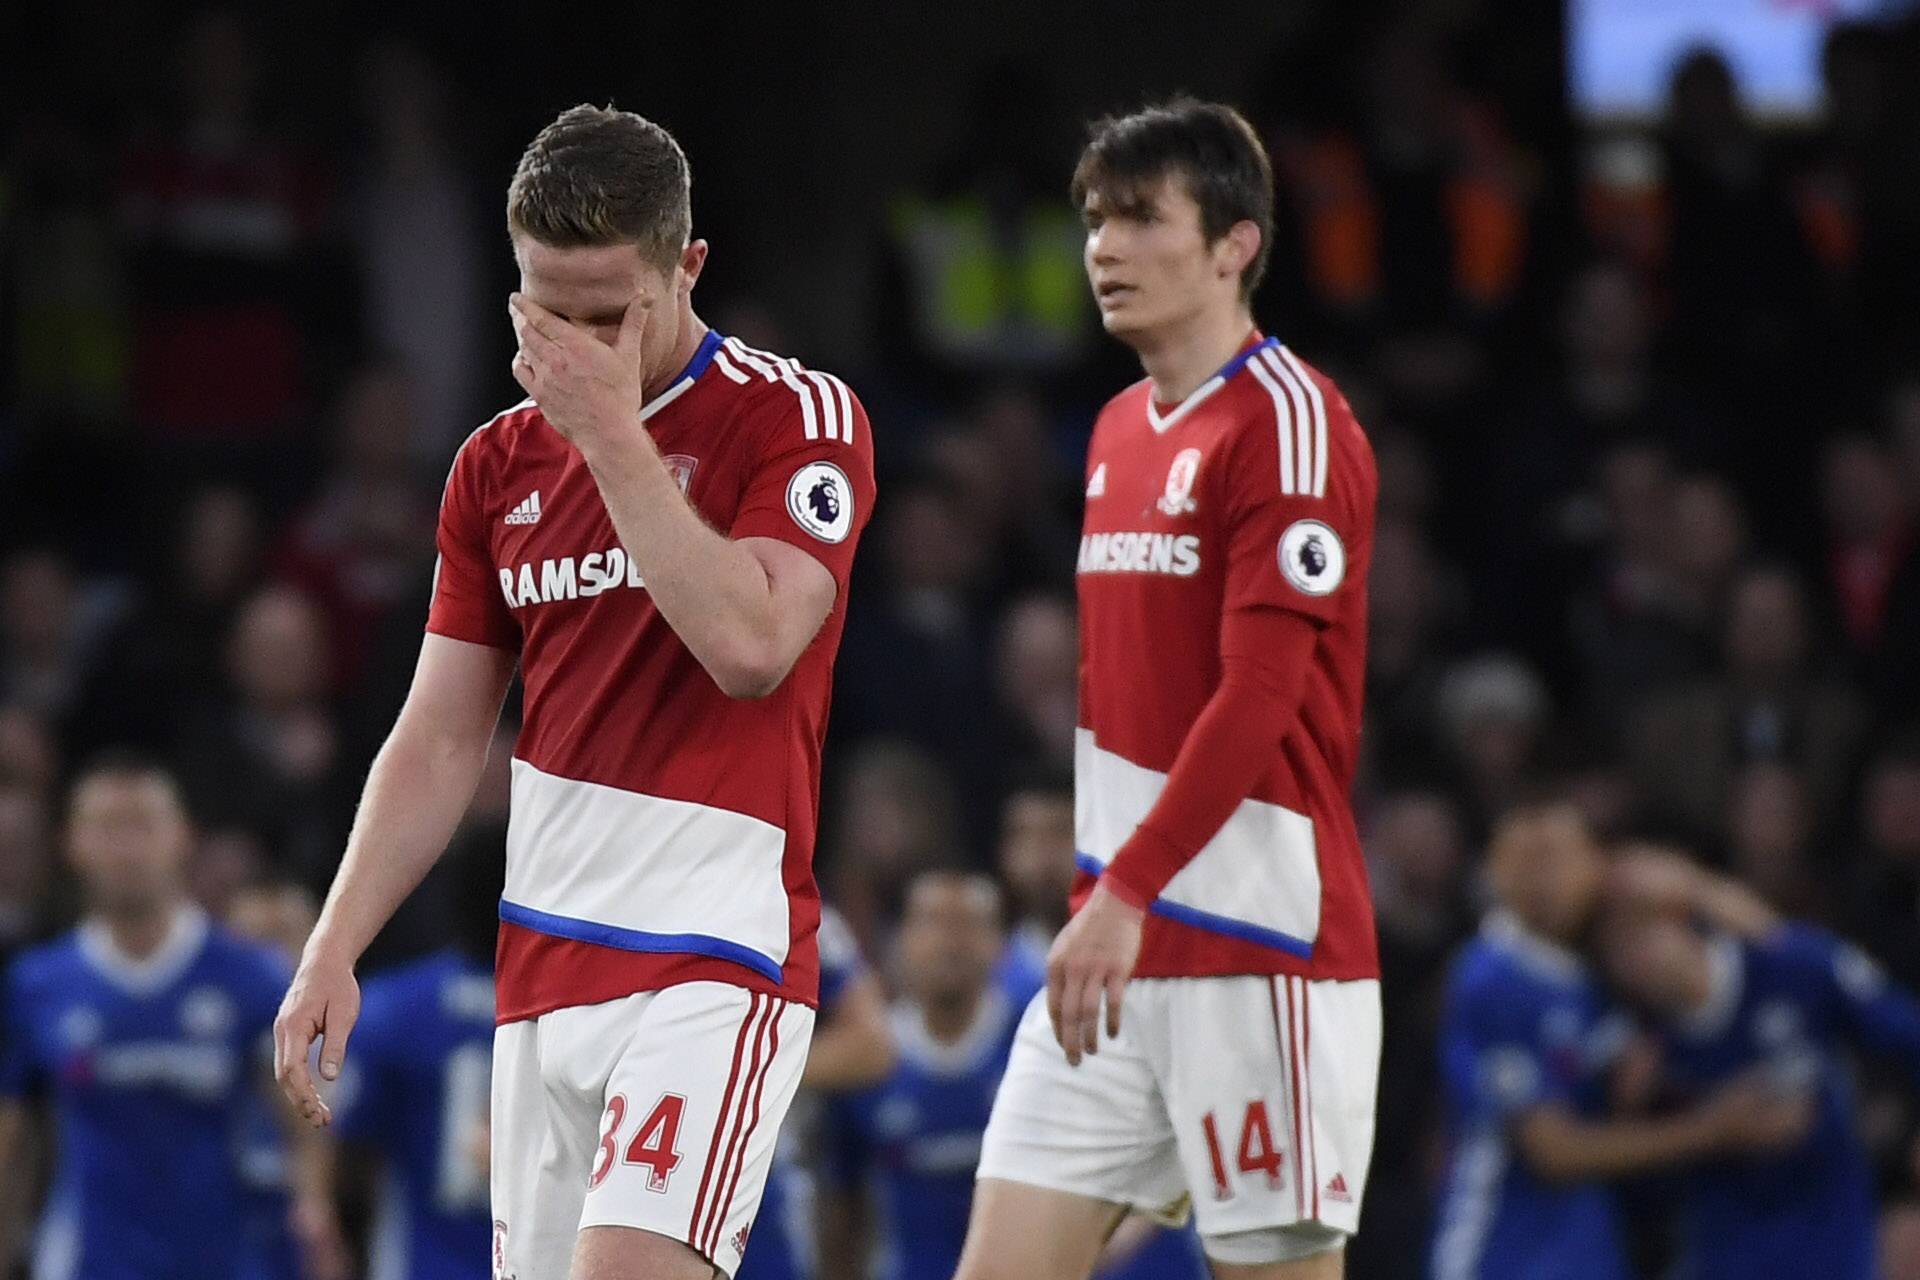 Middlesbrough's Adam Forshaw and Marten de Roon look dejected after Chelsea score their second goal